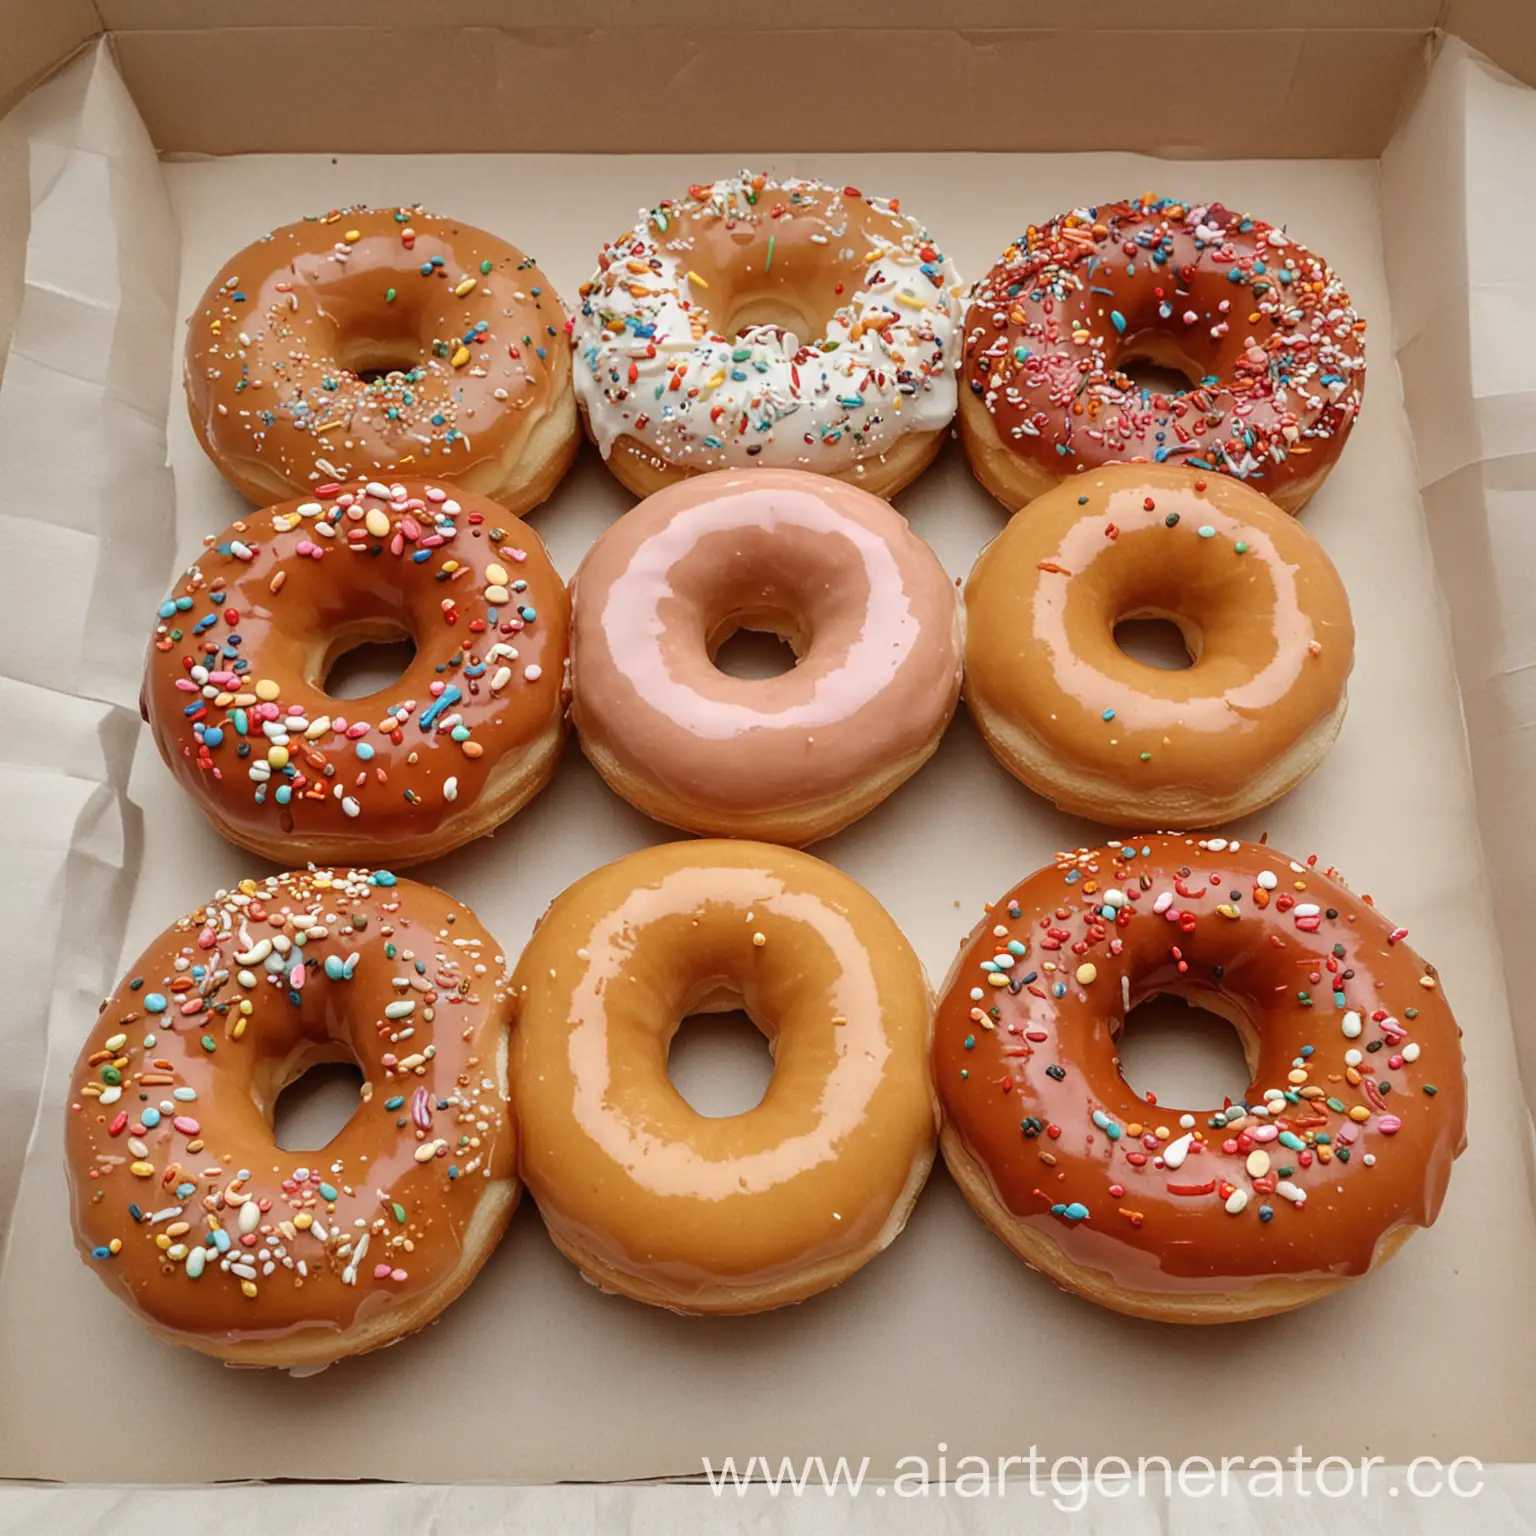 Colorful-Donuts-on-Bakery-Display-Stand-Delicious-Assortment-of-Sweet-Treats